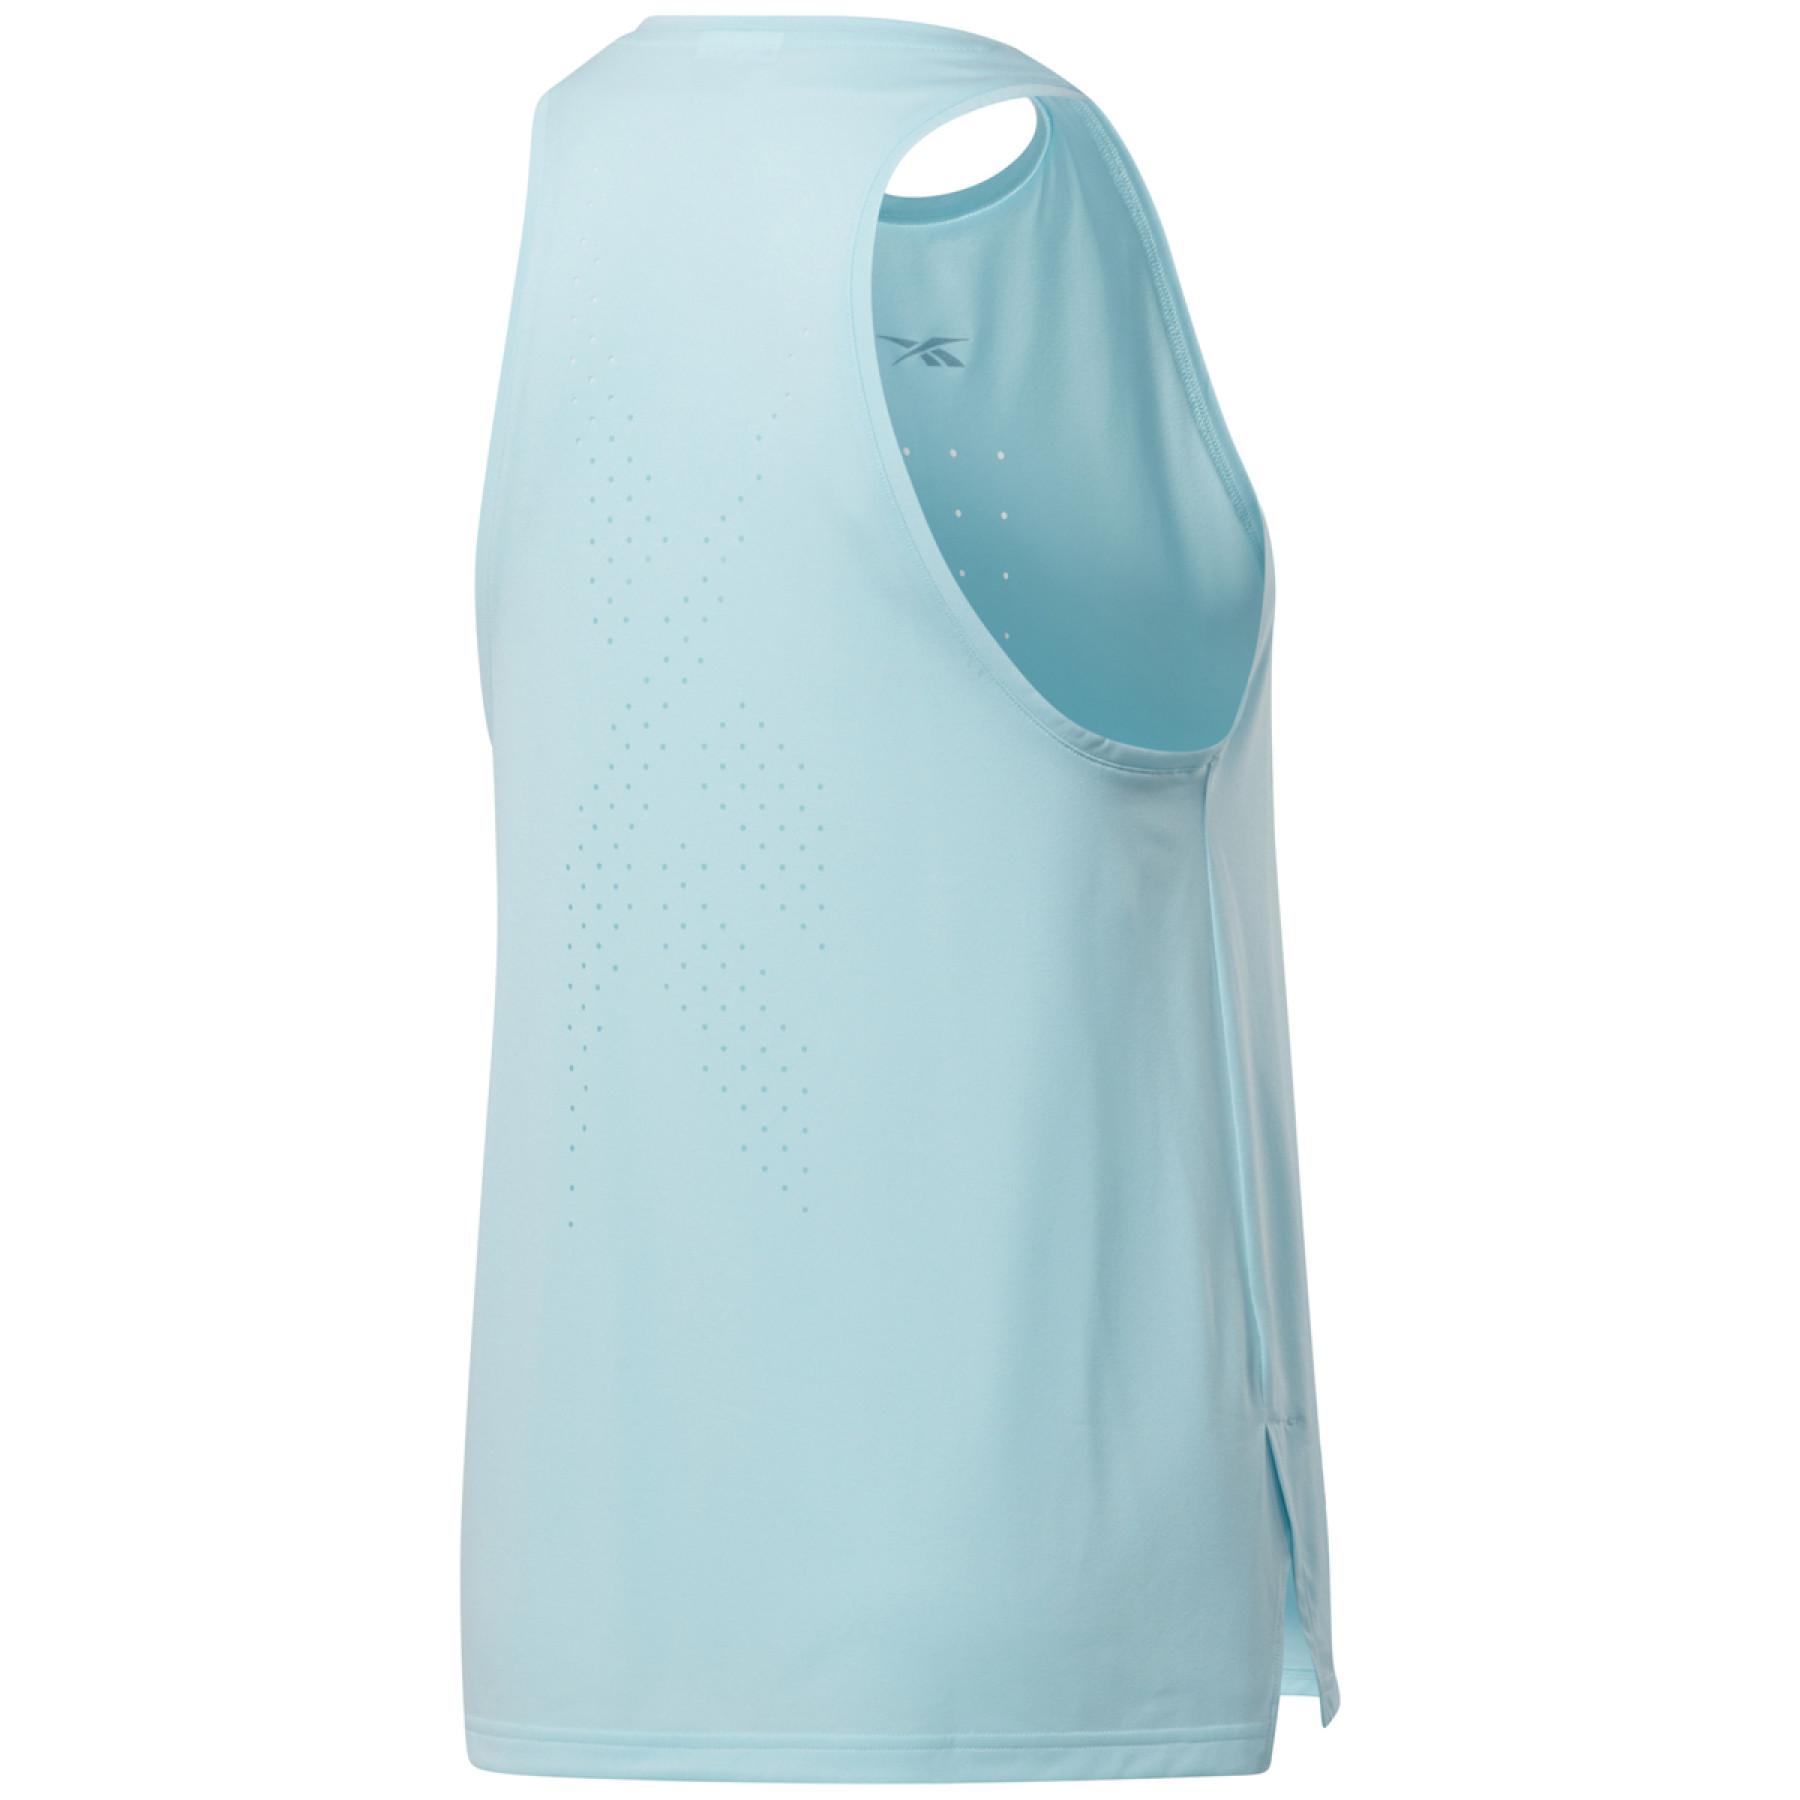 Damski tank top Reebok United By Fitness Perforated